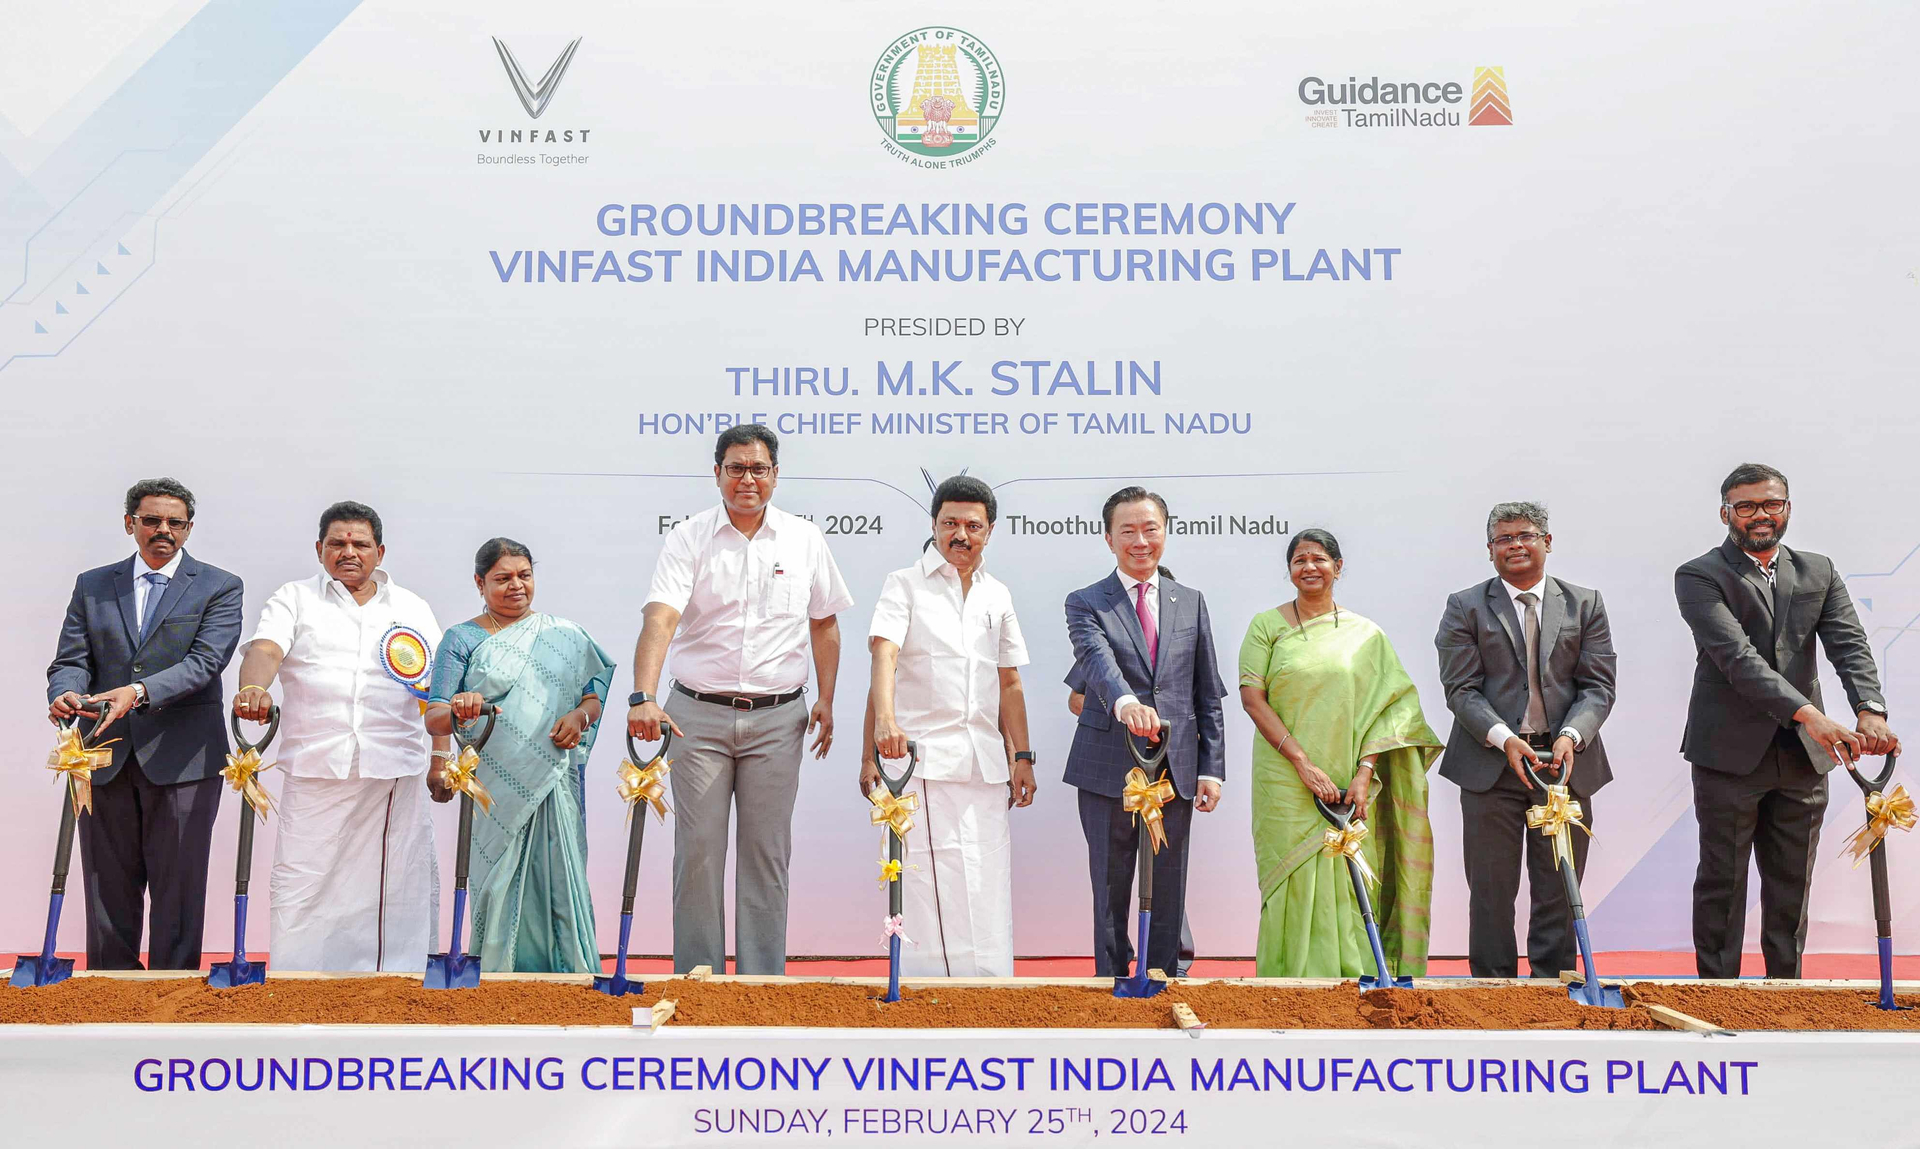 VinFast's groundbreaking ceremony of its manufacturing plant in Tamil Nadu state, India on February 25, 2024. Photo courtesy of VinFast.